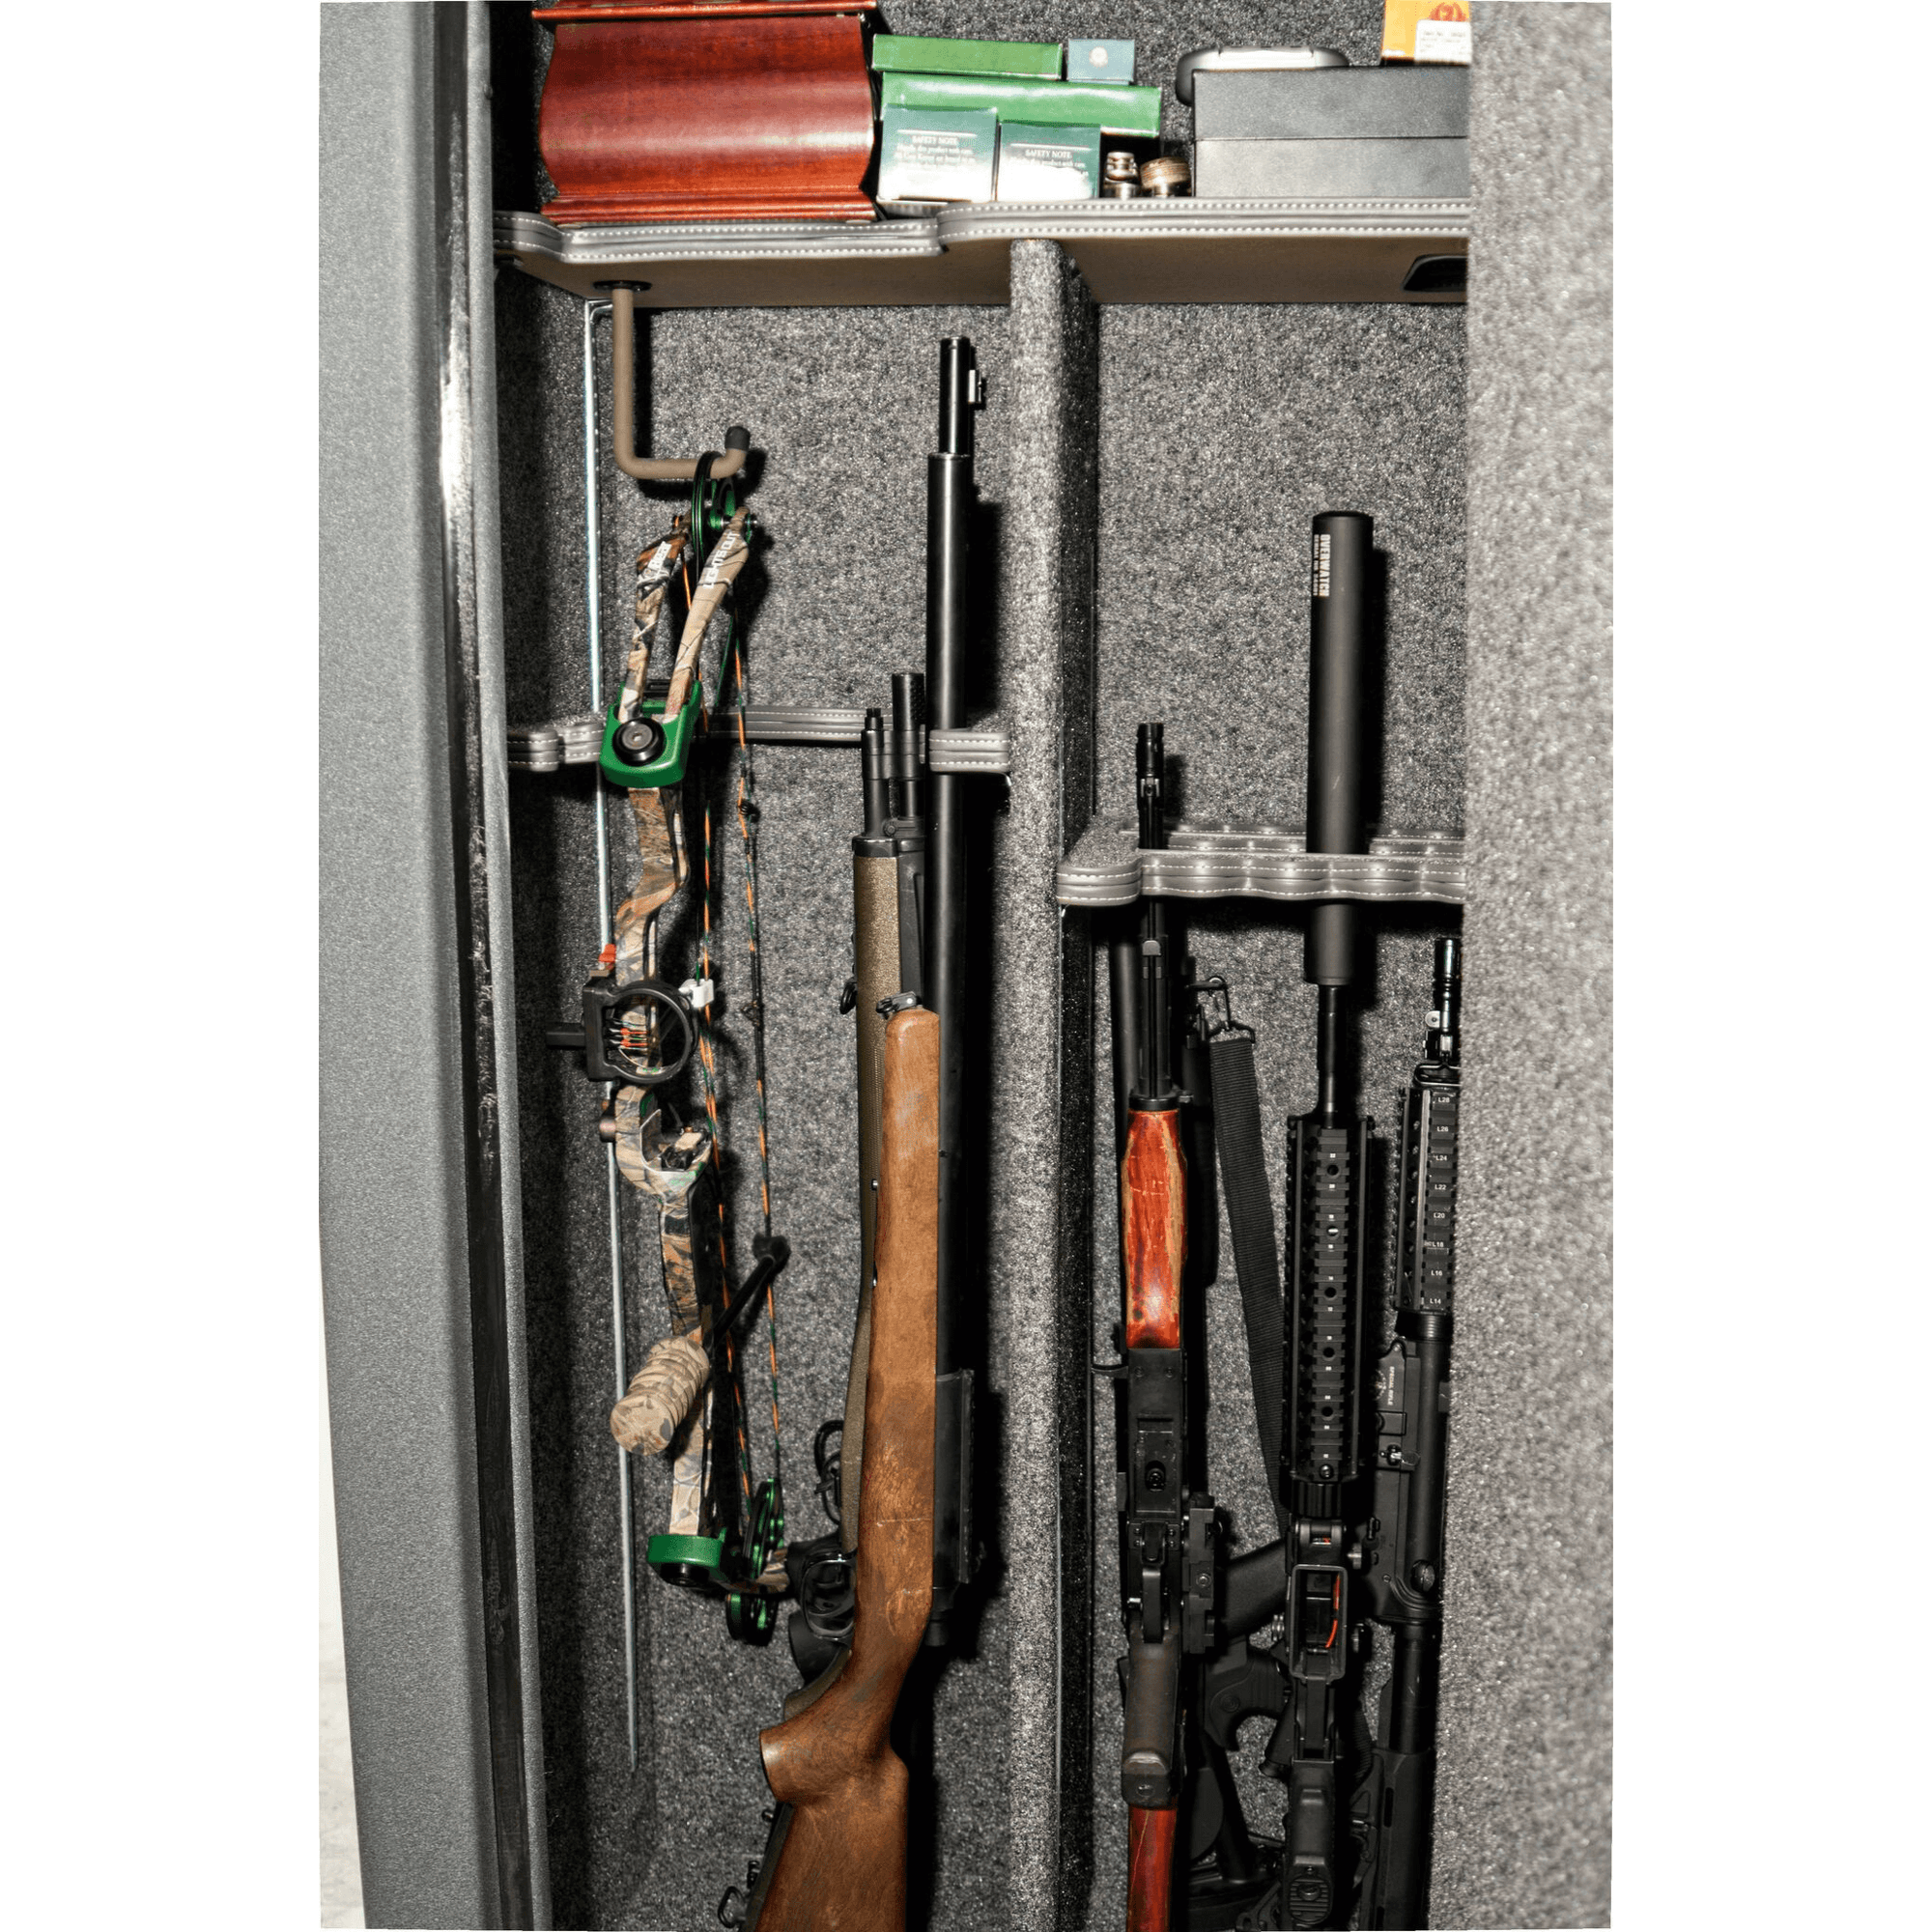 Accessory - Storage - Bow Hanger | Liberty Safe Norcal.